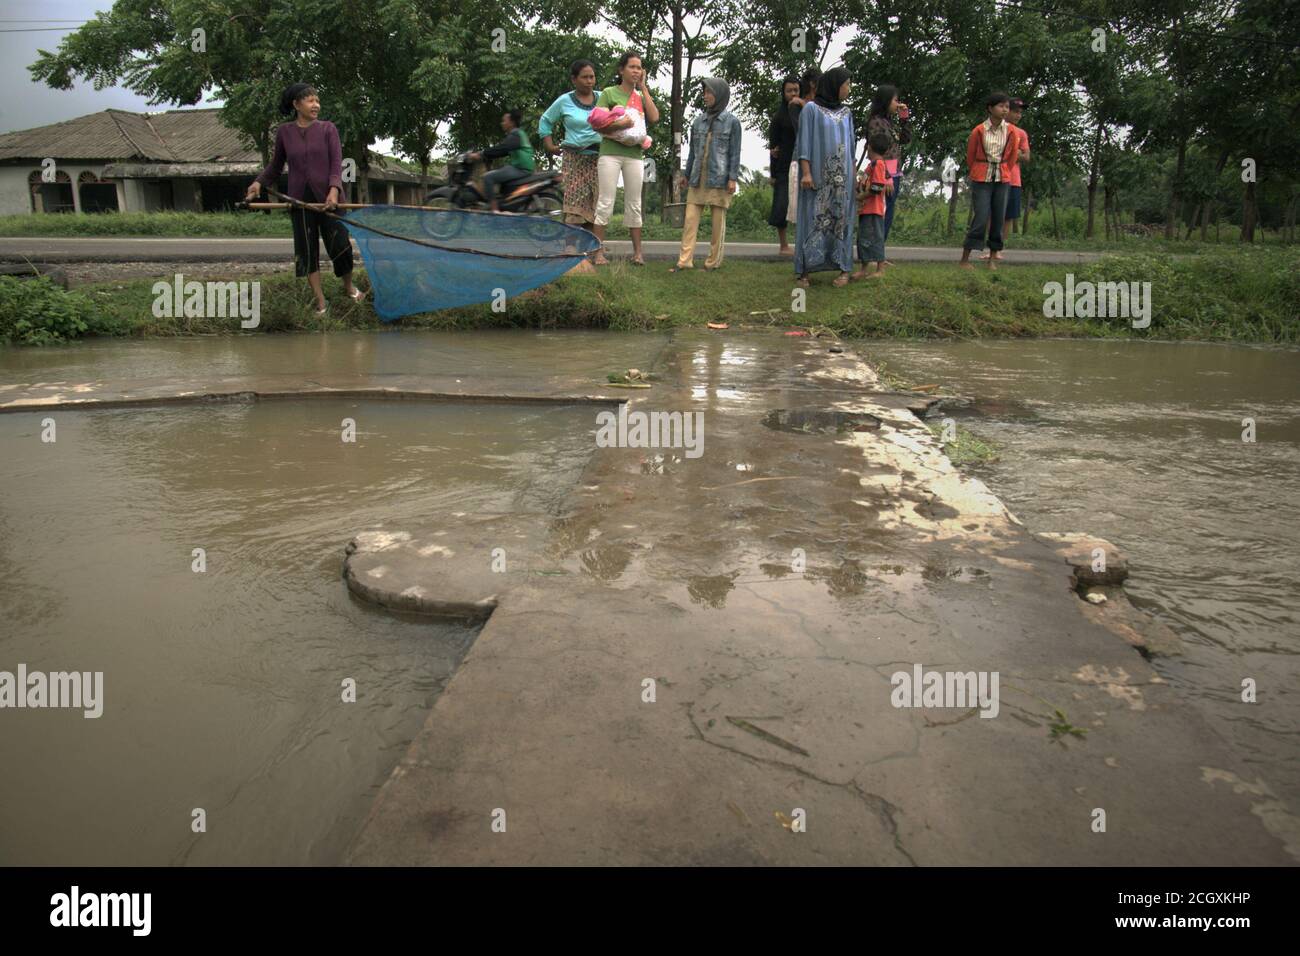 A woman holding a pushnet as people gathers on the bank of an irrigation canal in Karawang regency, West Java province, Indonesia. Stock Photo